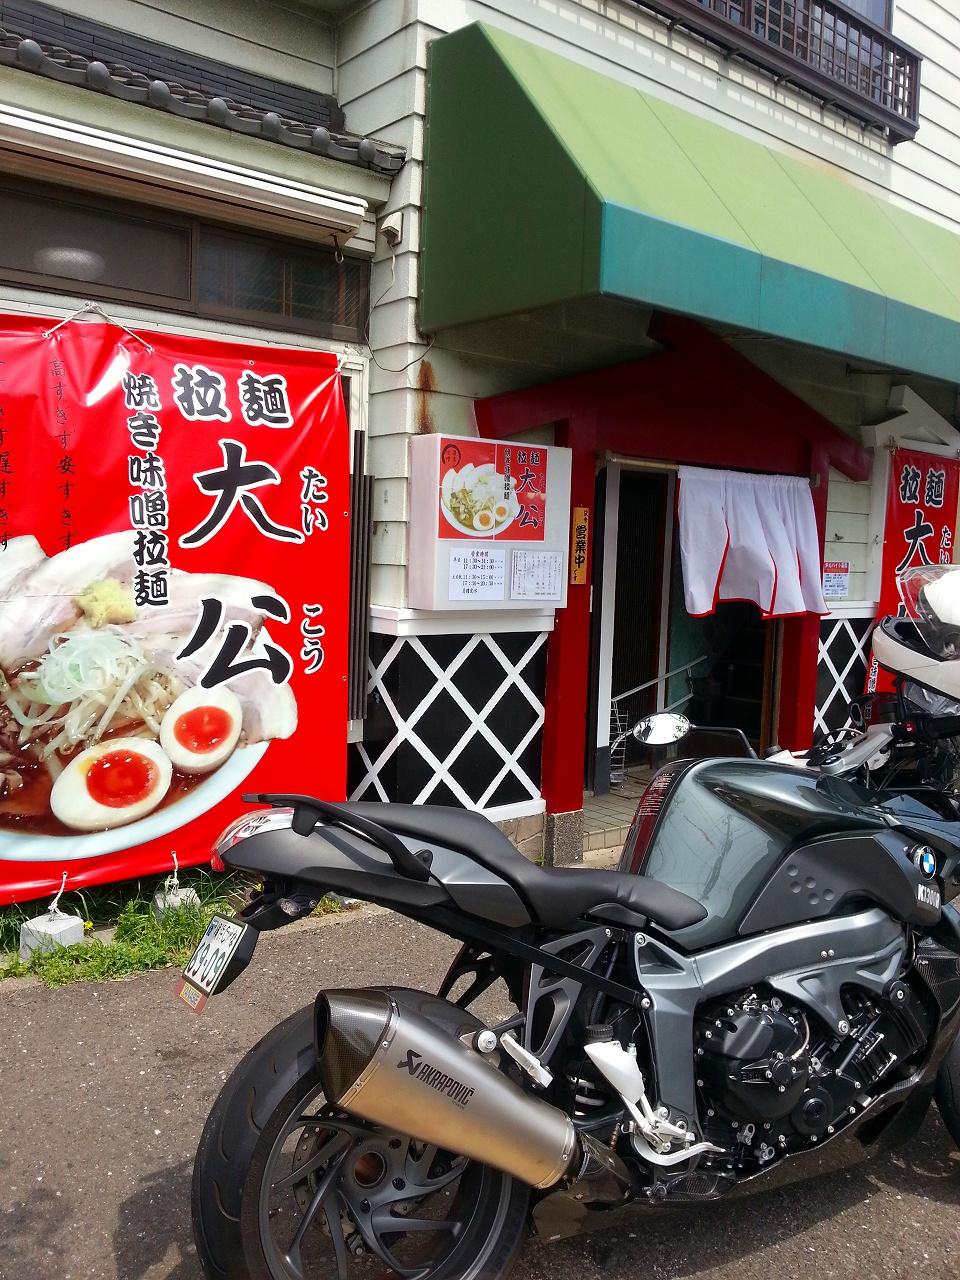 Other Environmental Photo. Kenz staff recommended 450m to the Grand Duke (miso ramen shop)